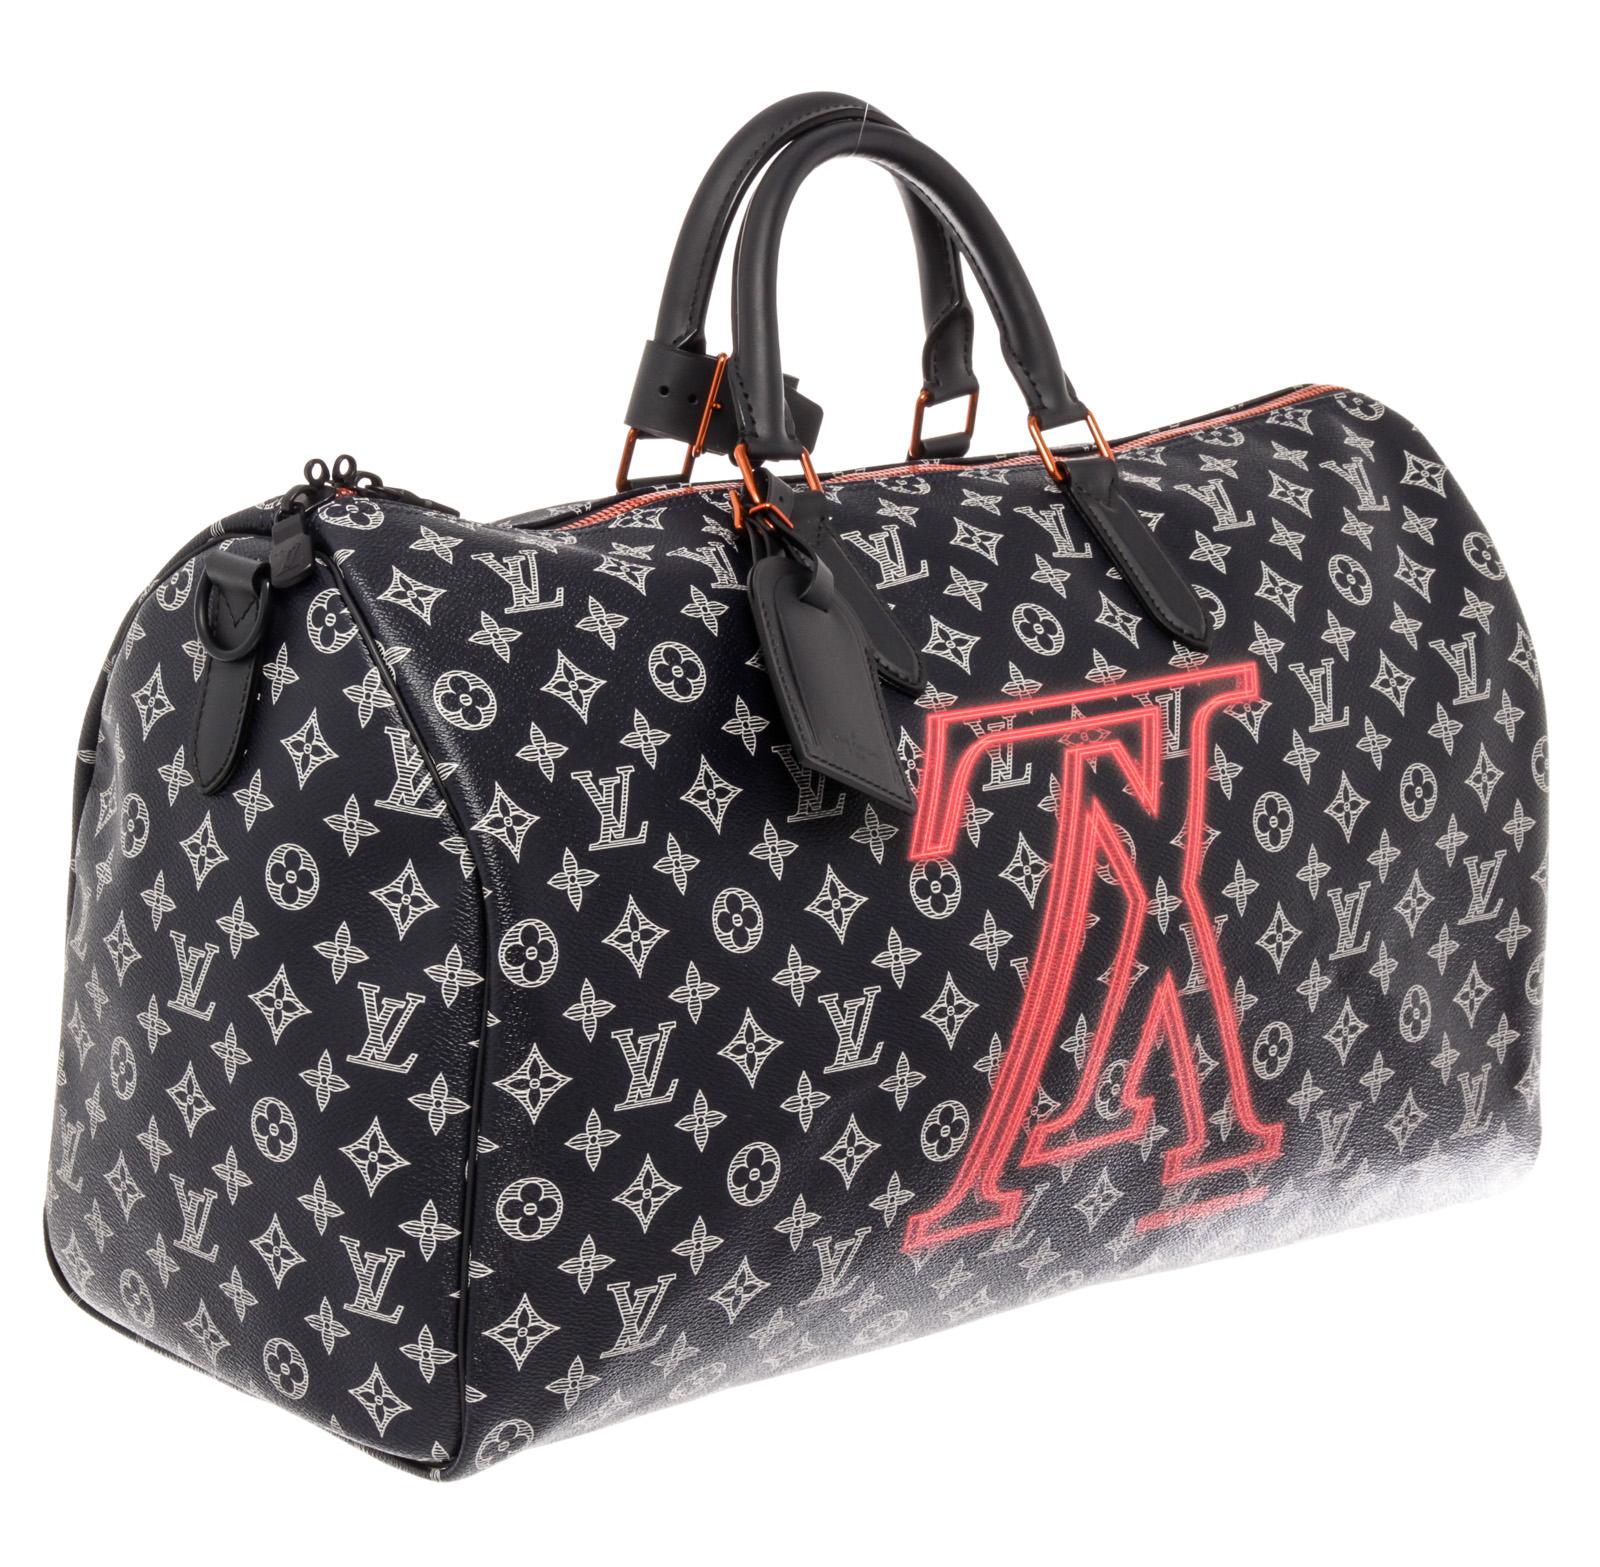 Men's midnight and white Monogram coated canvas Louis Vuitton Upside Down Keepall Bandouliere 50 weekender with multitonal hardware, dual rolled top handles, single flat adjustable canvas shoulder strap, tonal leather trim, inverted Initiales print